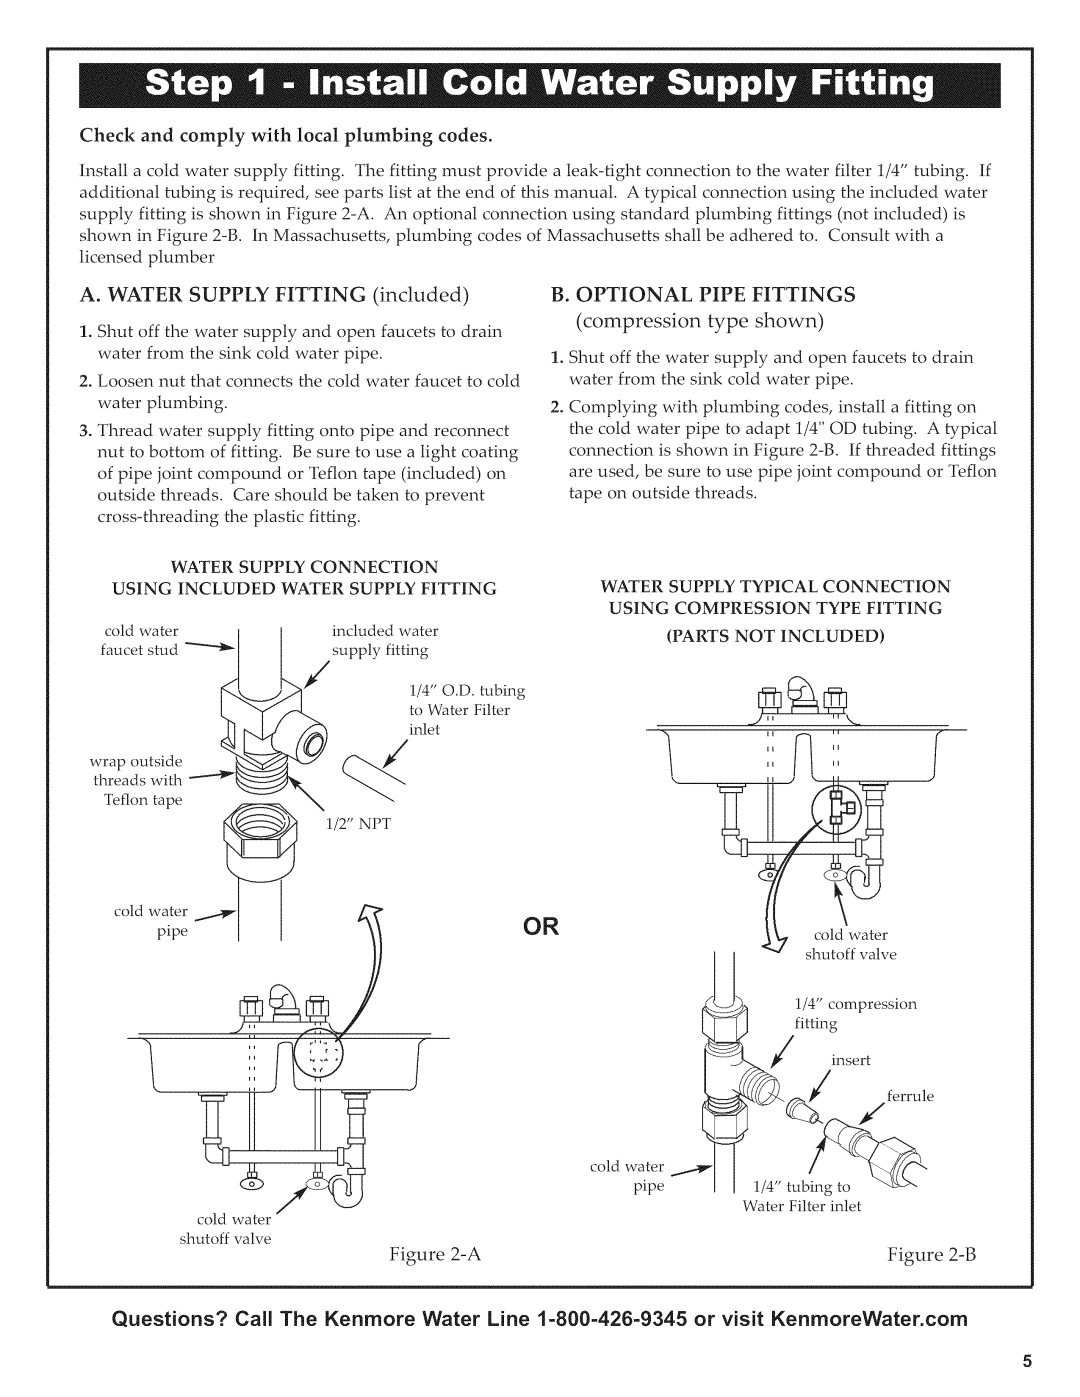 Kenmore 625.38454 owner manual incudedwater, codwaer, B. OPTIONAL PIPE FITTINGS compression type shown, Parts Not Included 